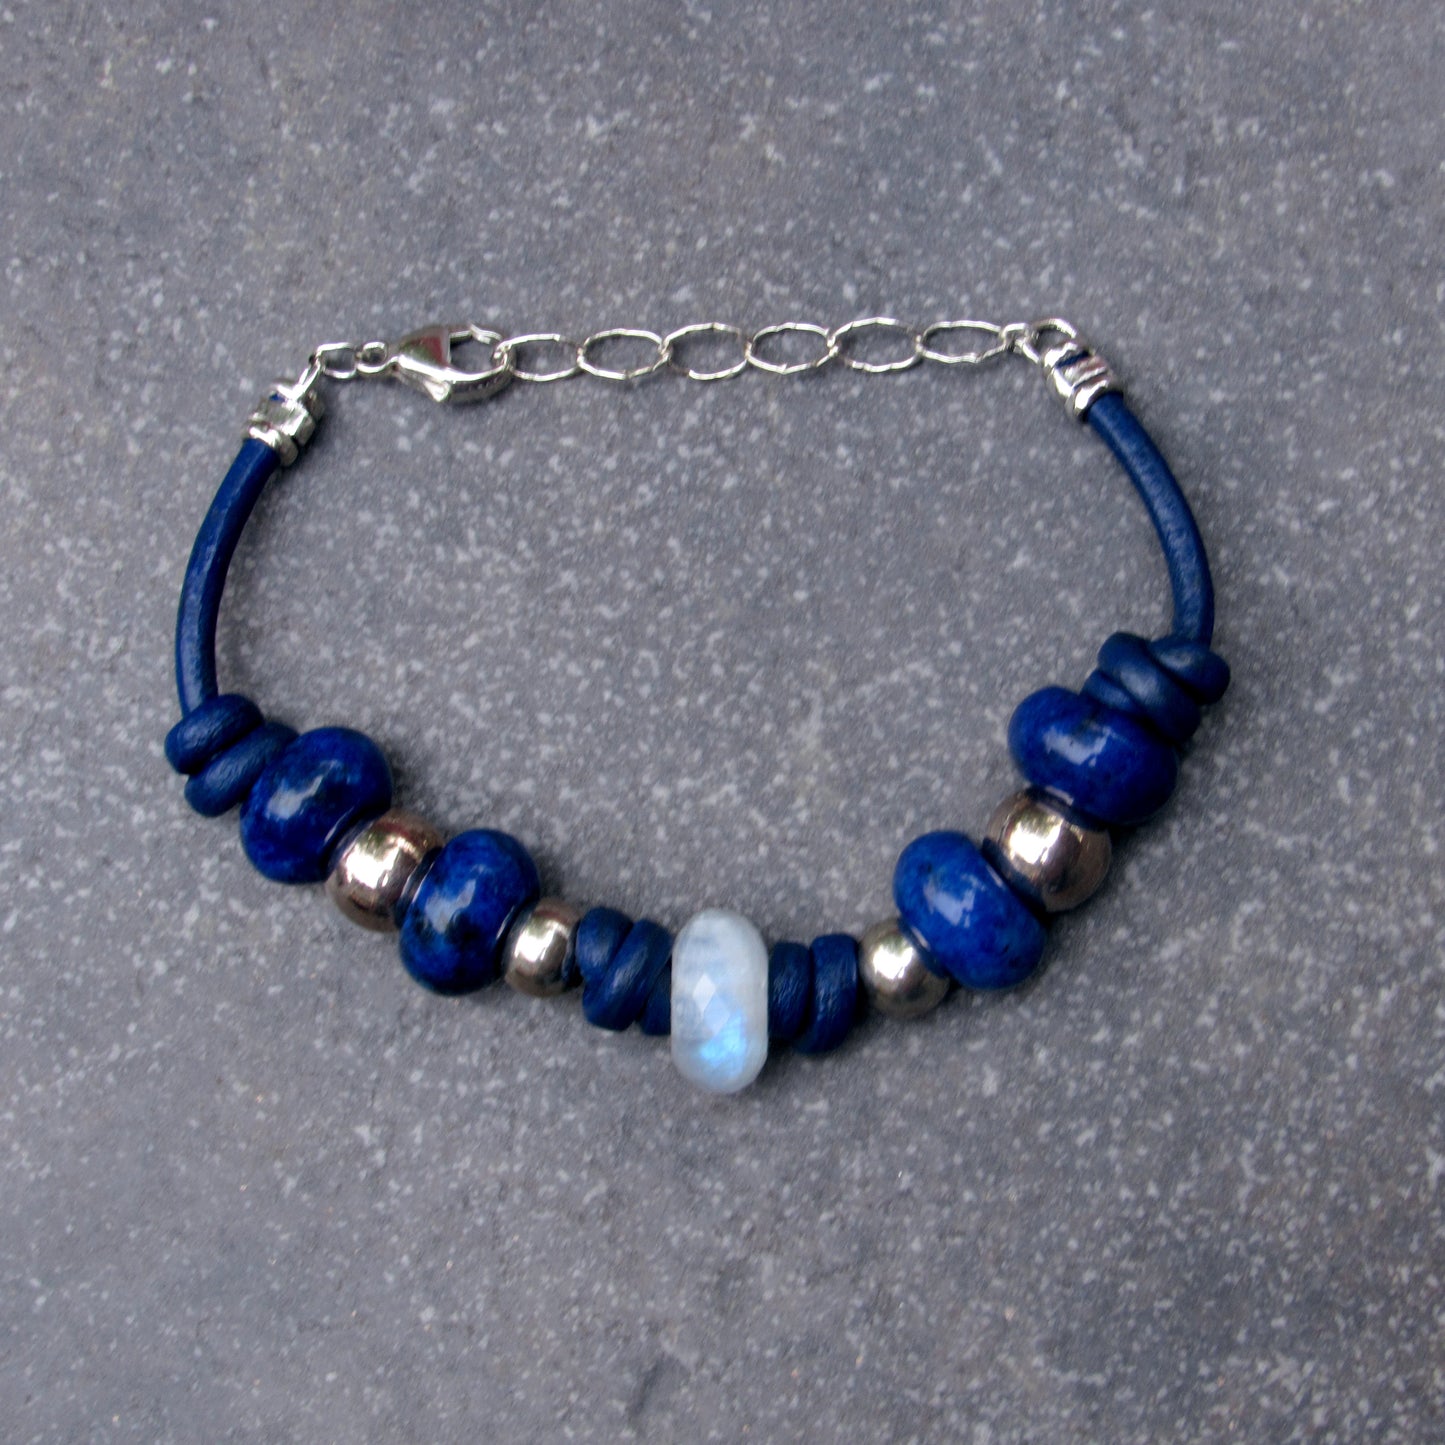 Moonstone center stone with Lapis Lazuli gemstones, and Sterling Silver leather bracelet